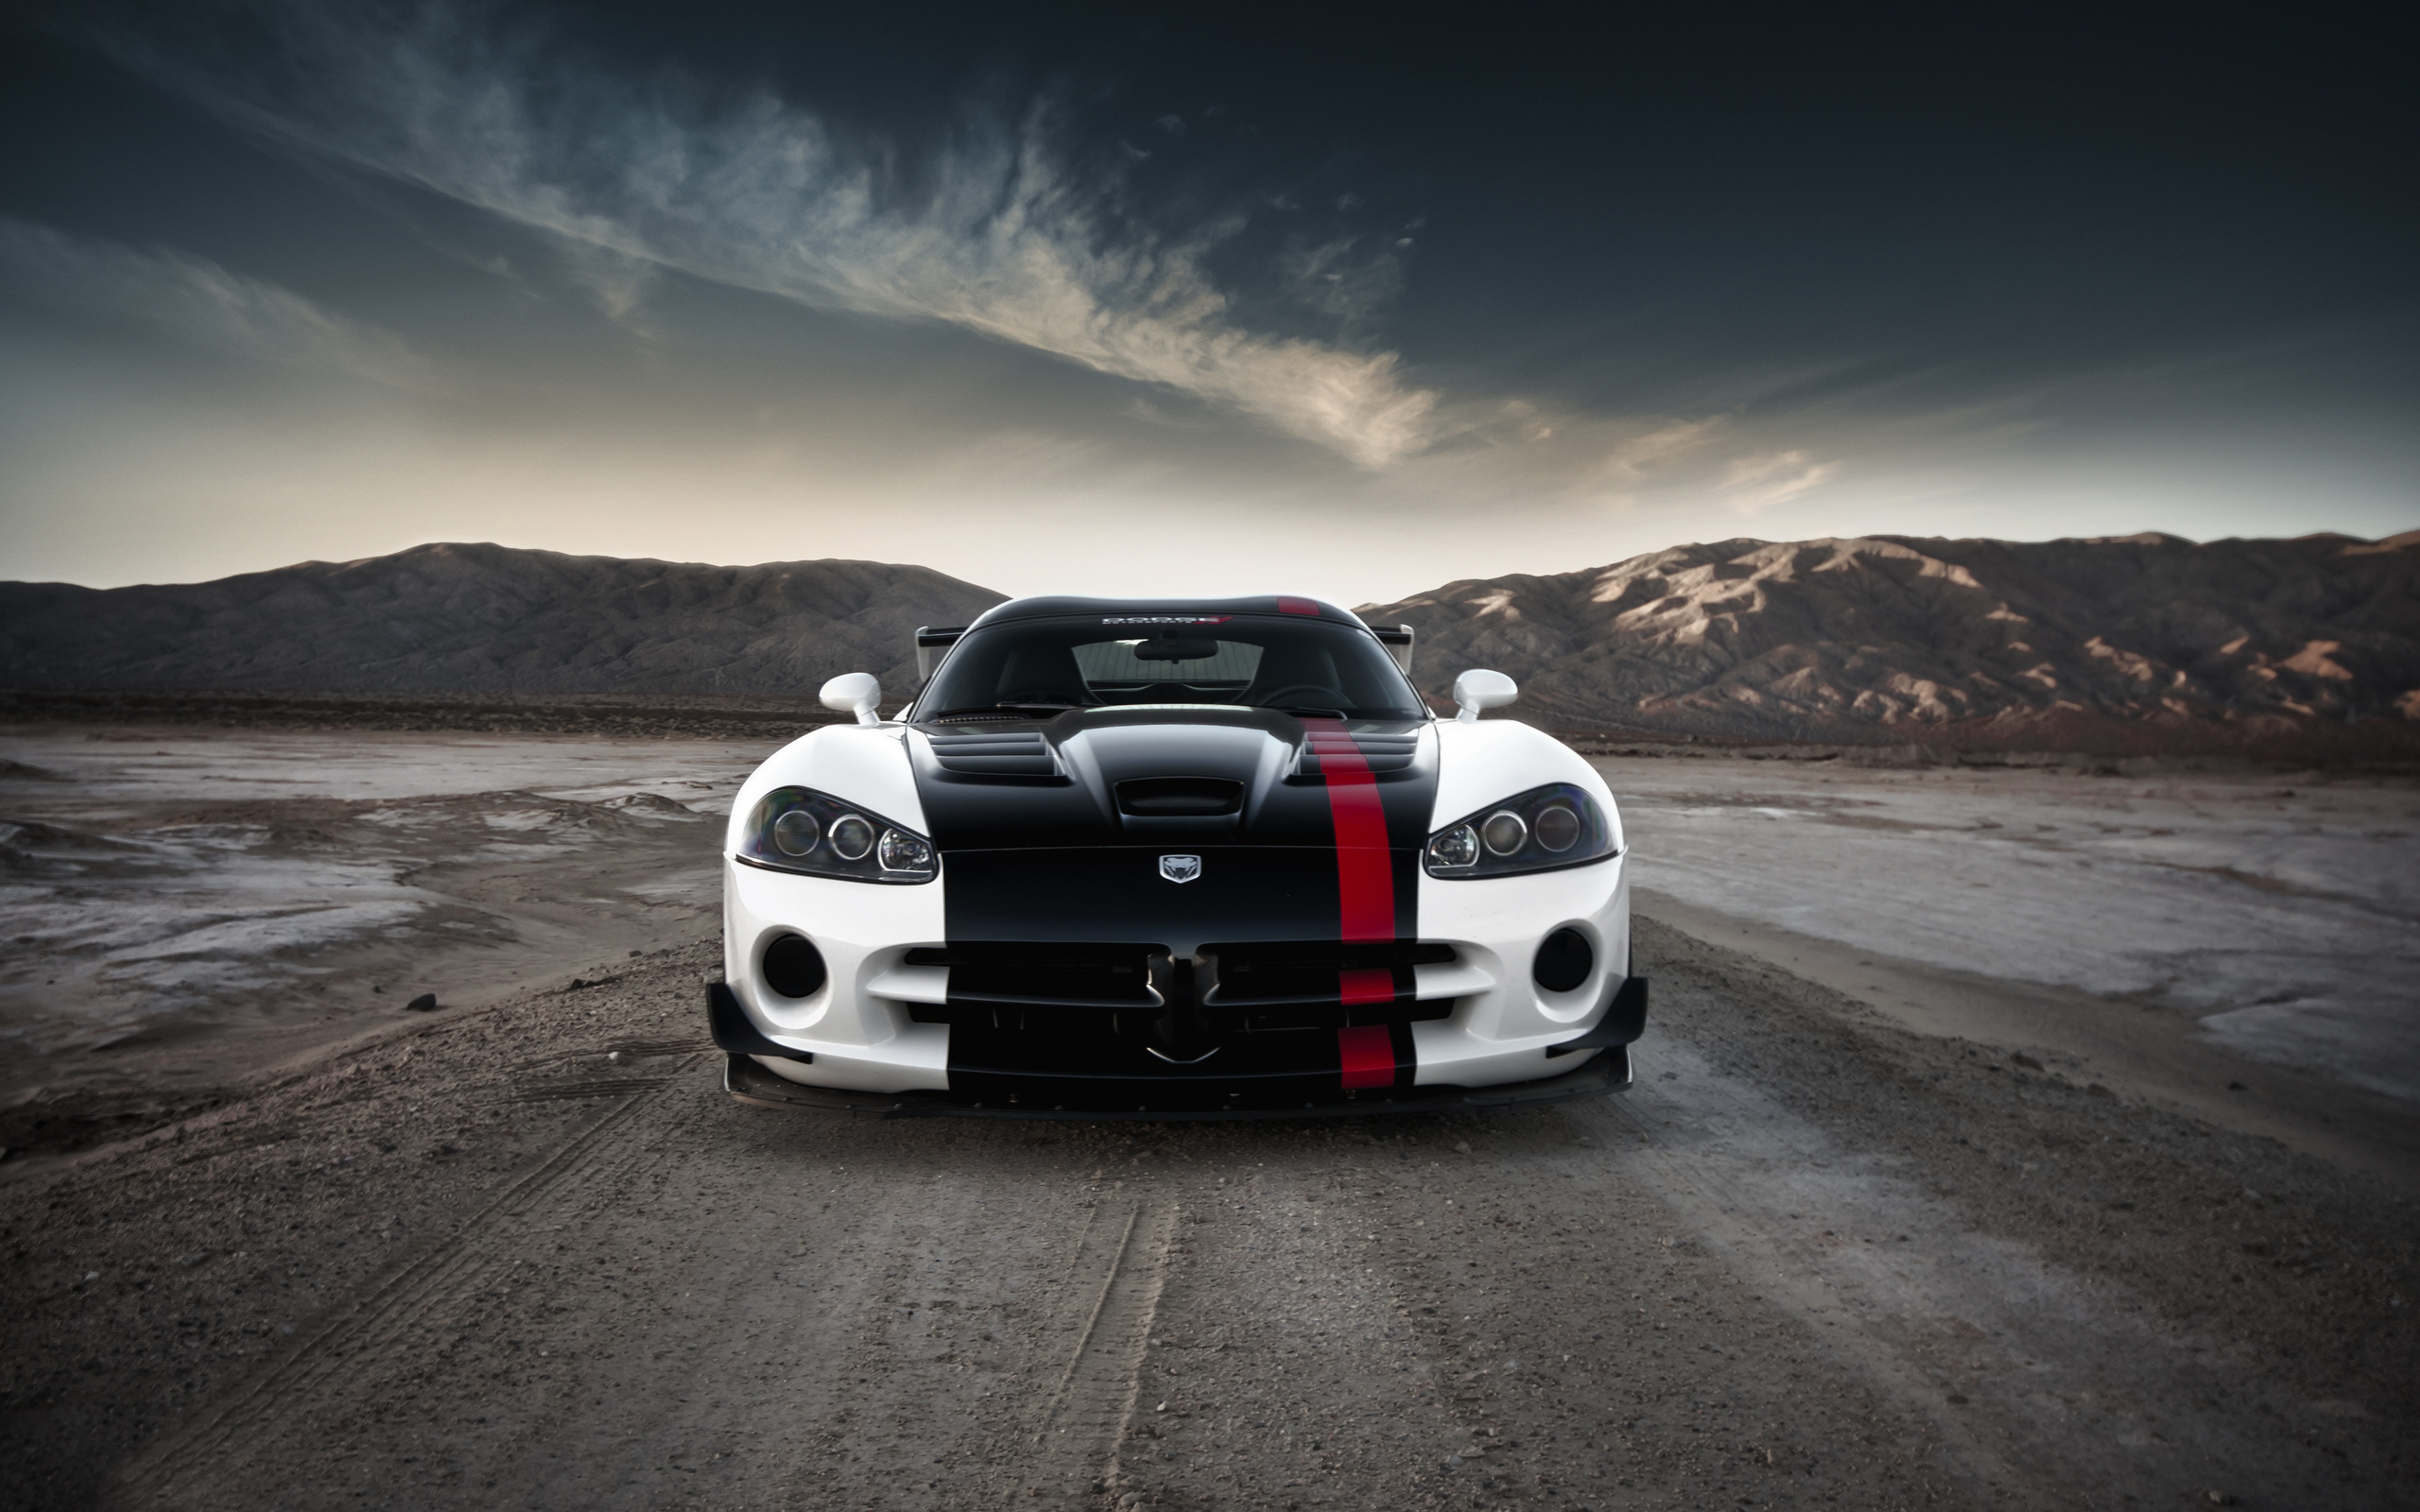 48 High Resolution Hd Wallpapers Cars